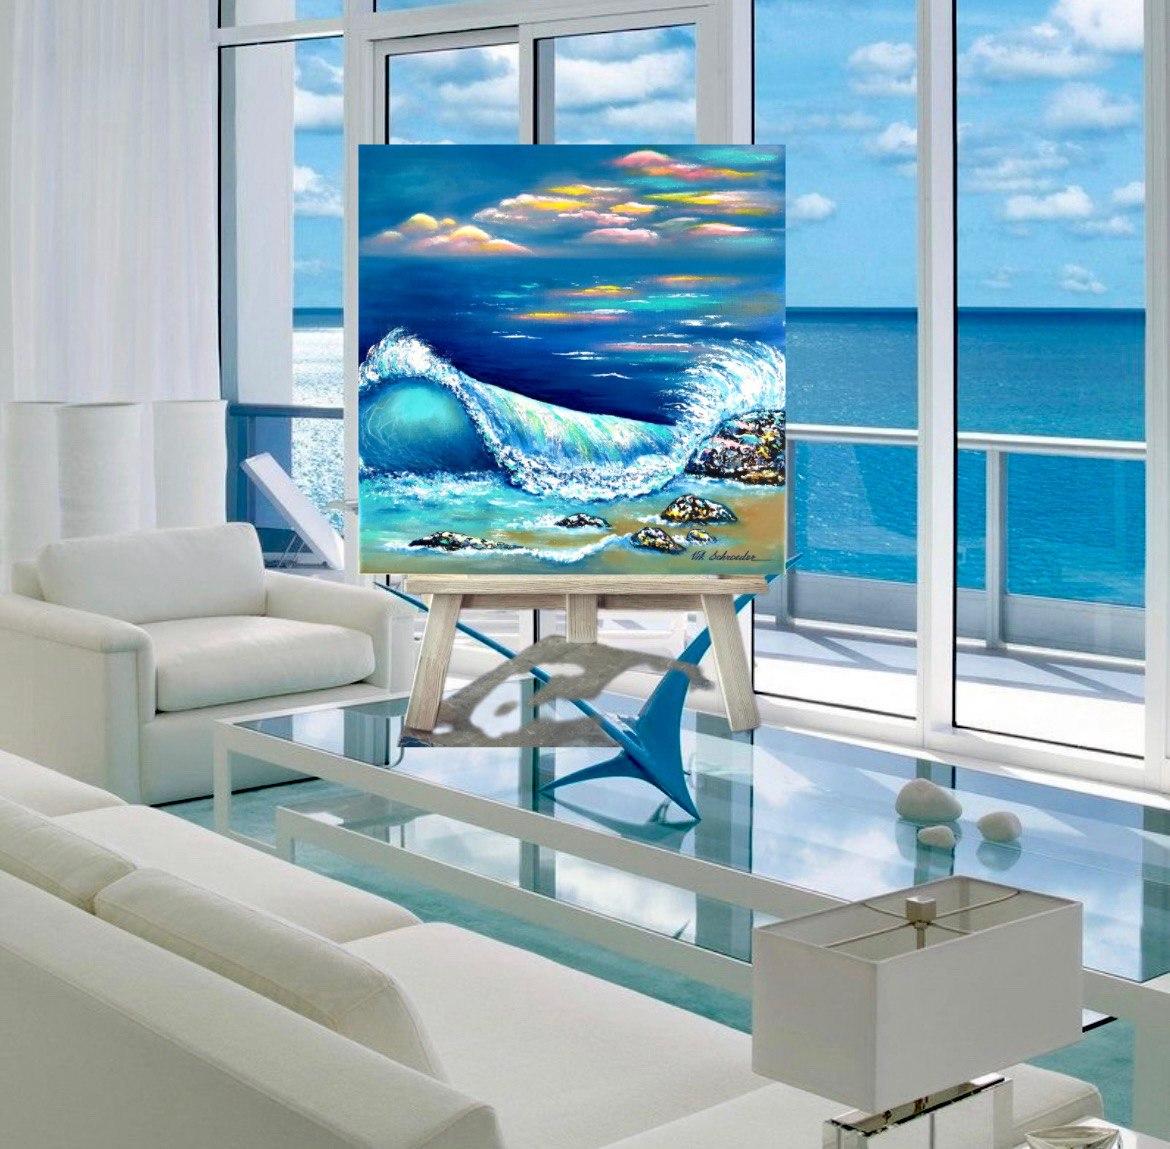 When the sea merges with the sky. Impressionism oil painting / wave / Gift Art. - Abstract Impressionist Painting by Vik Schroeder 